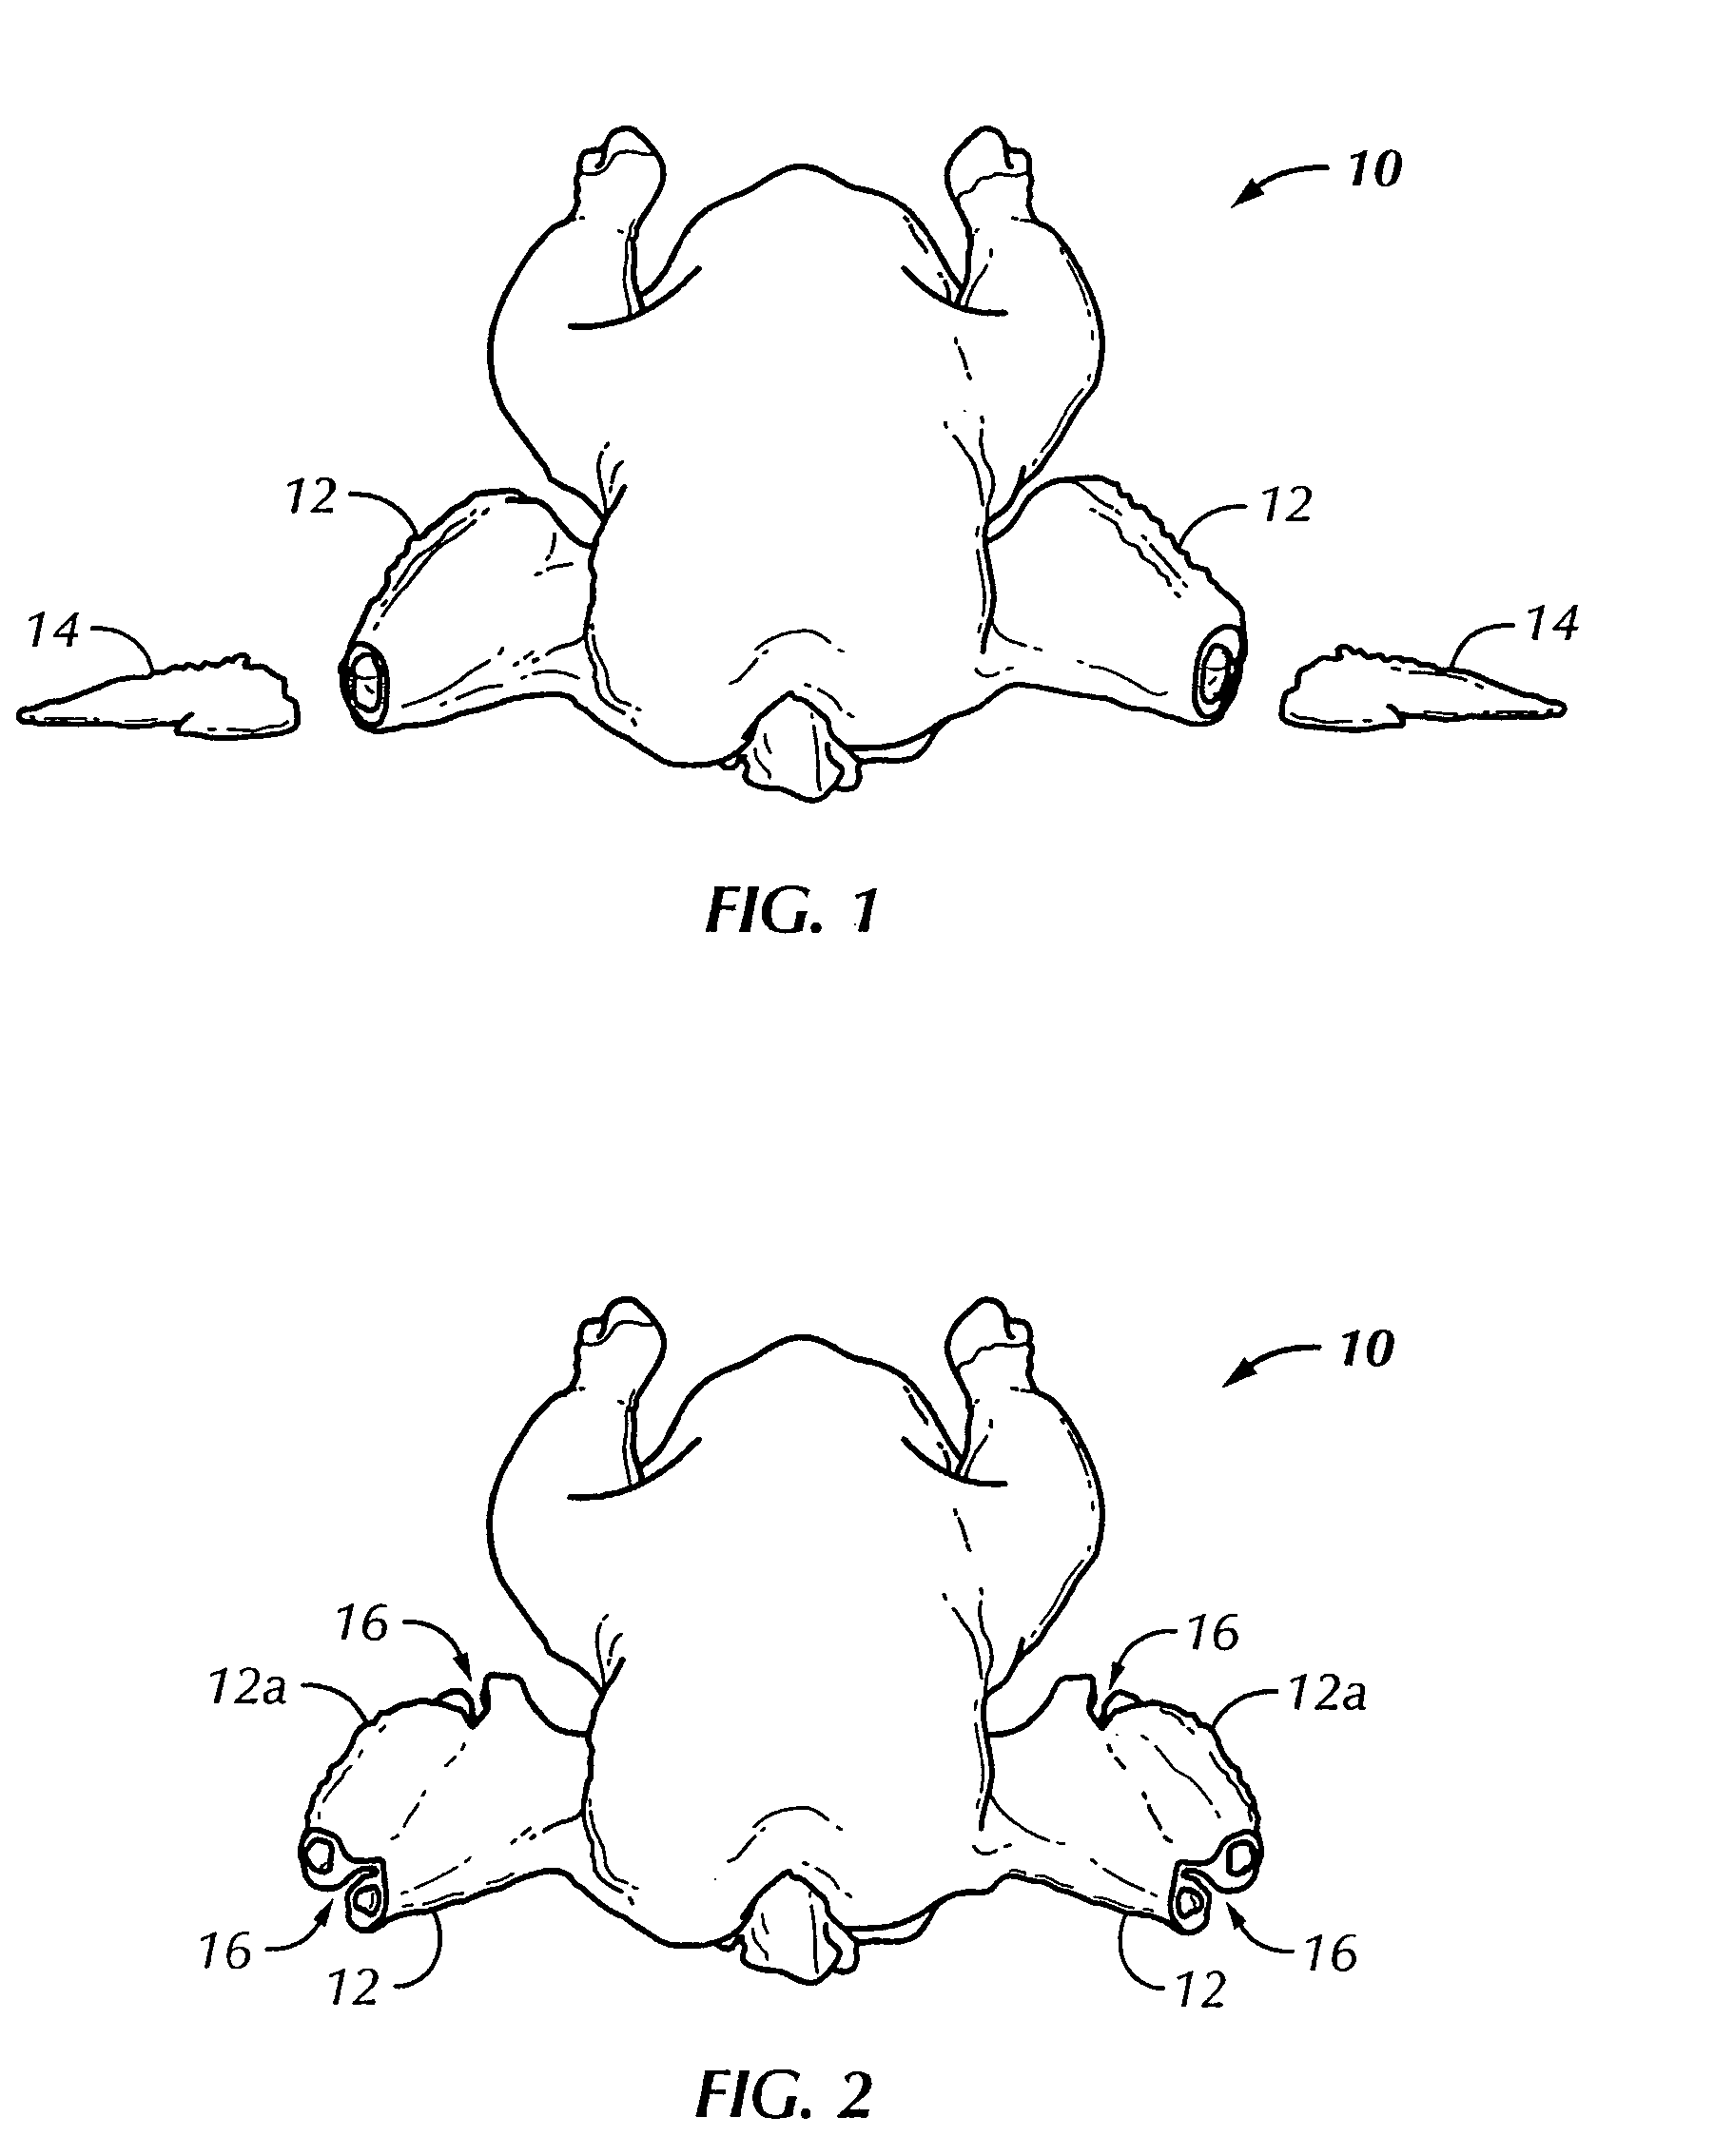 Method of preparing a bird for grilling and resulting bird product